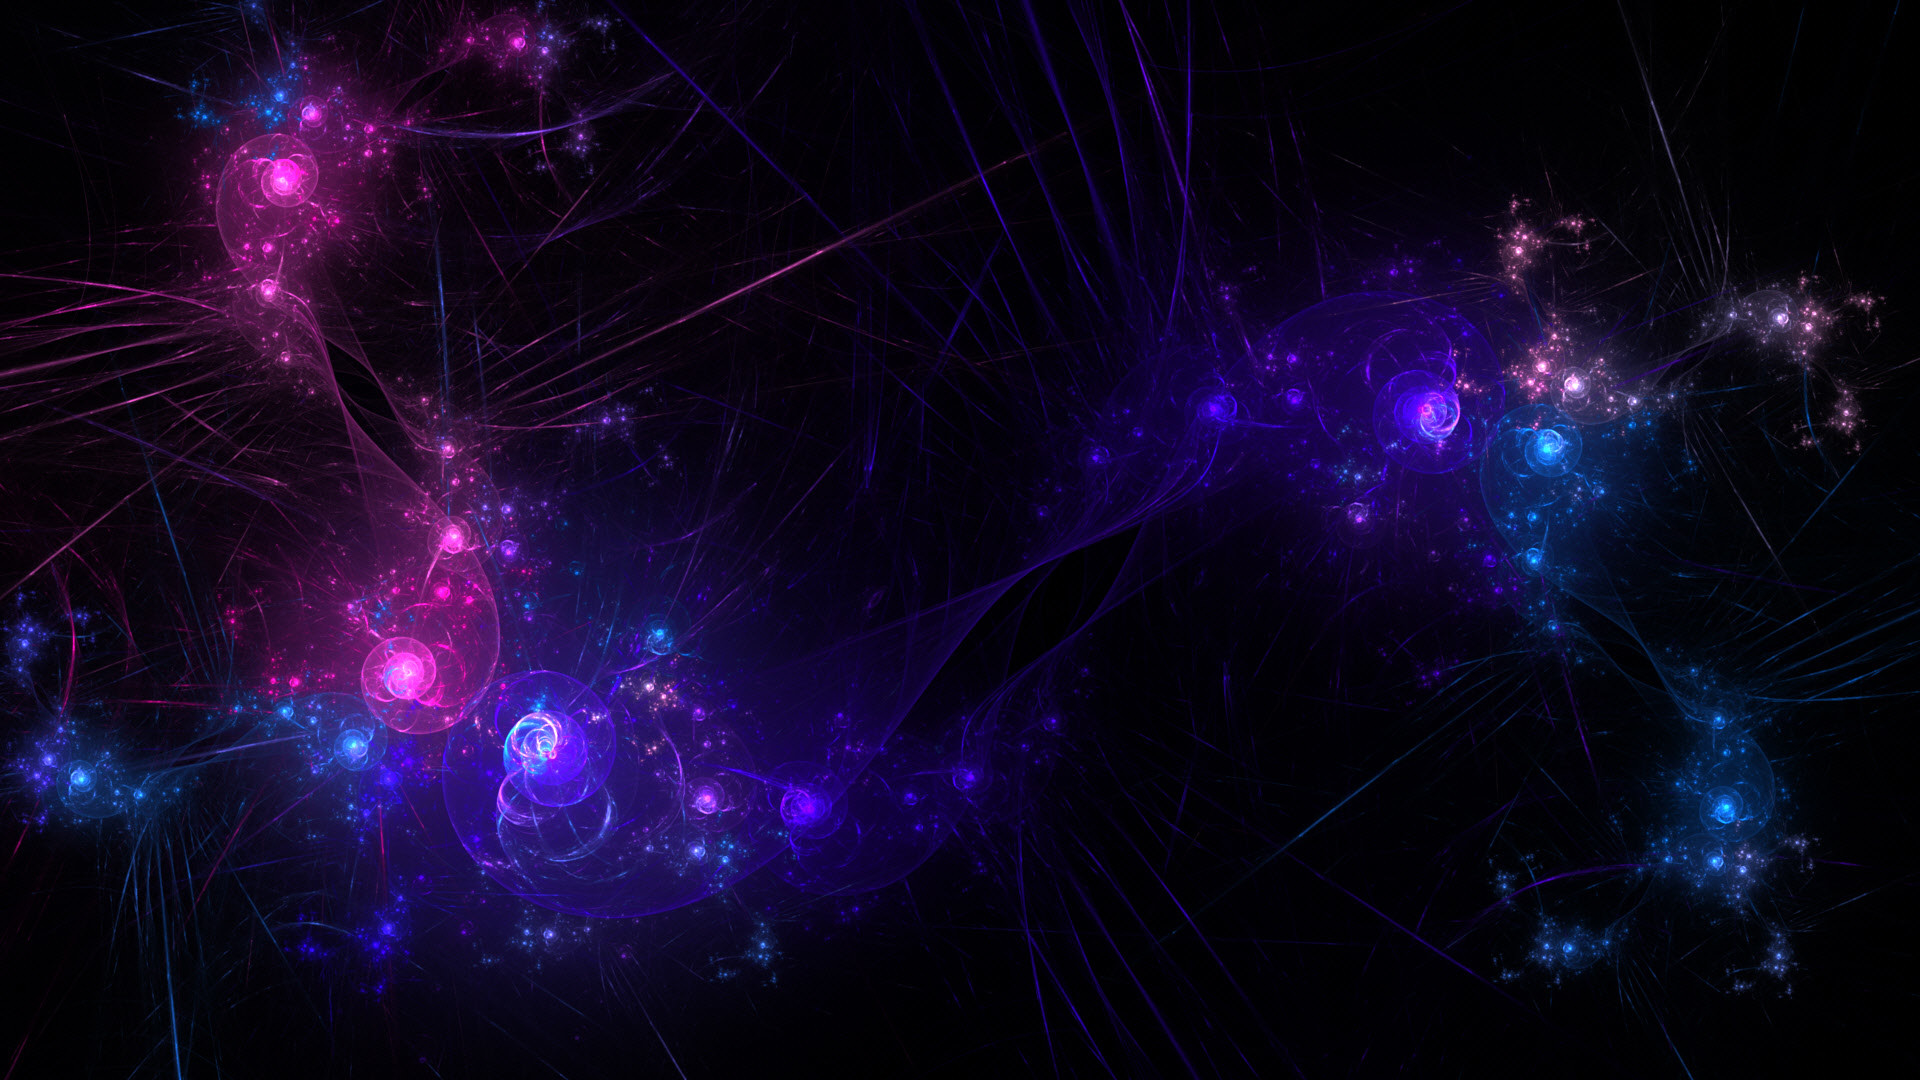 gaming wallpapers 1920x1080,violet,purple,light,sky,astronomical object